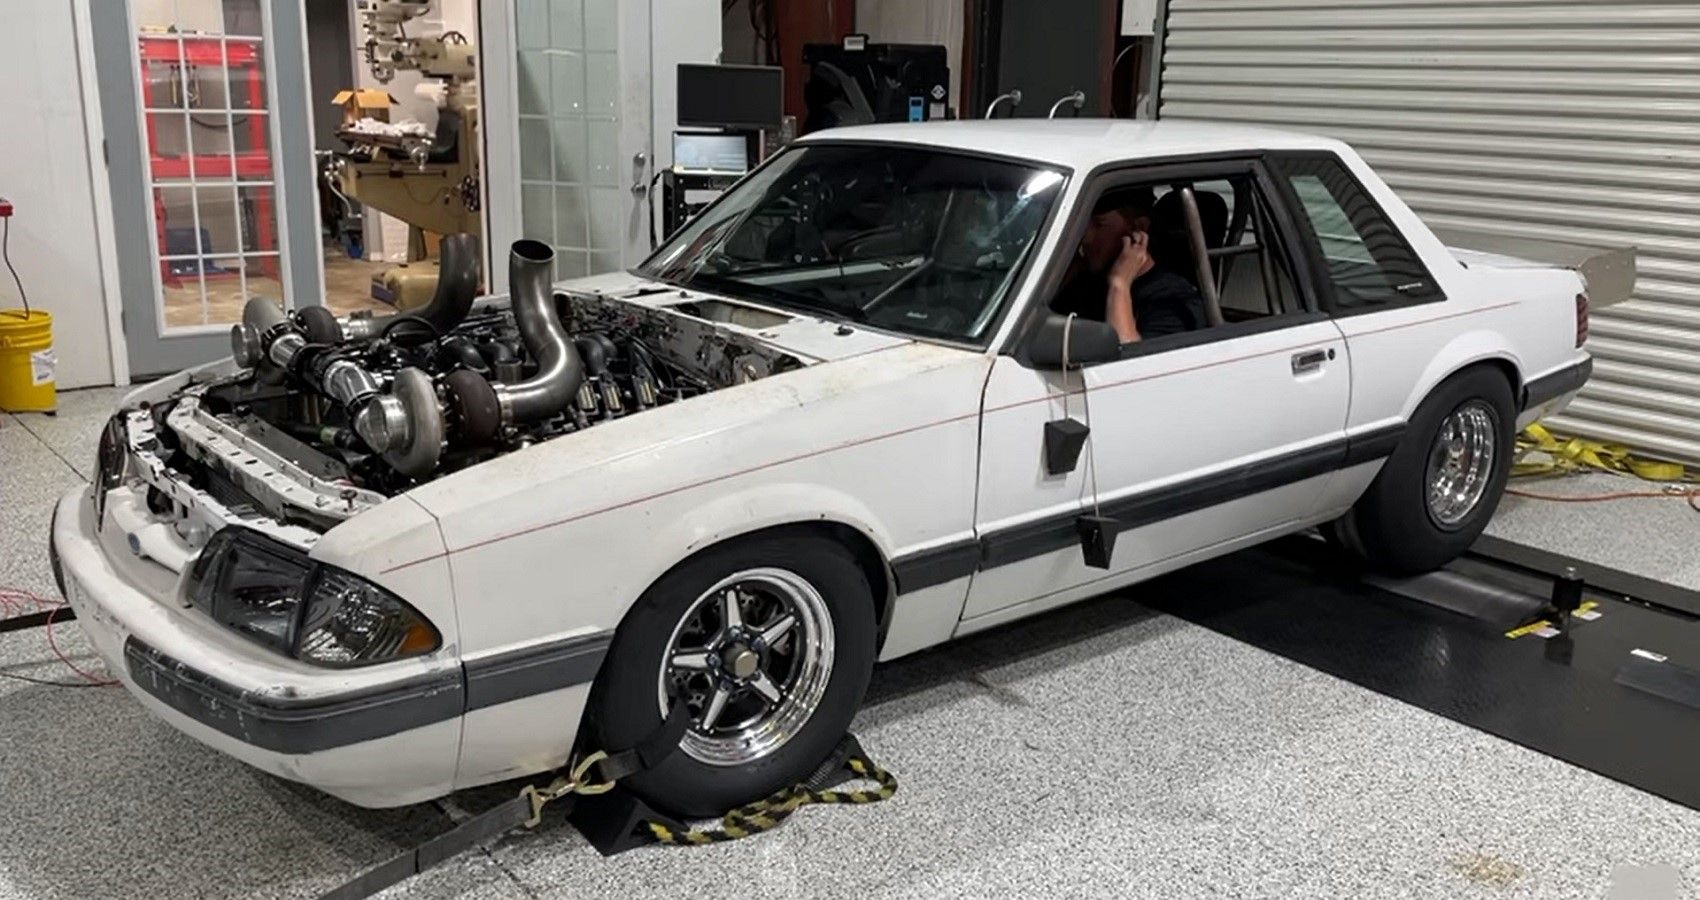 Ford Fox Body Mustang on dyno, front quarter view